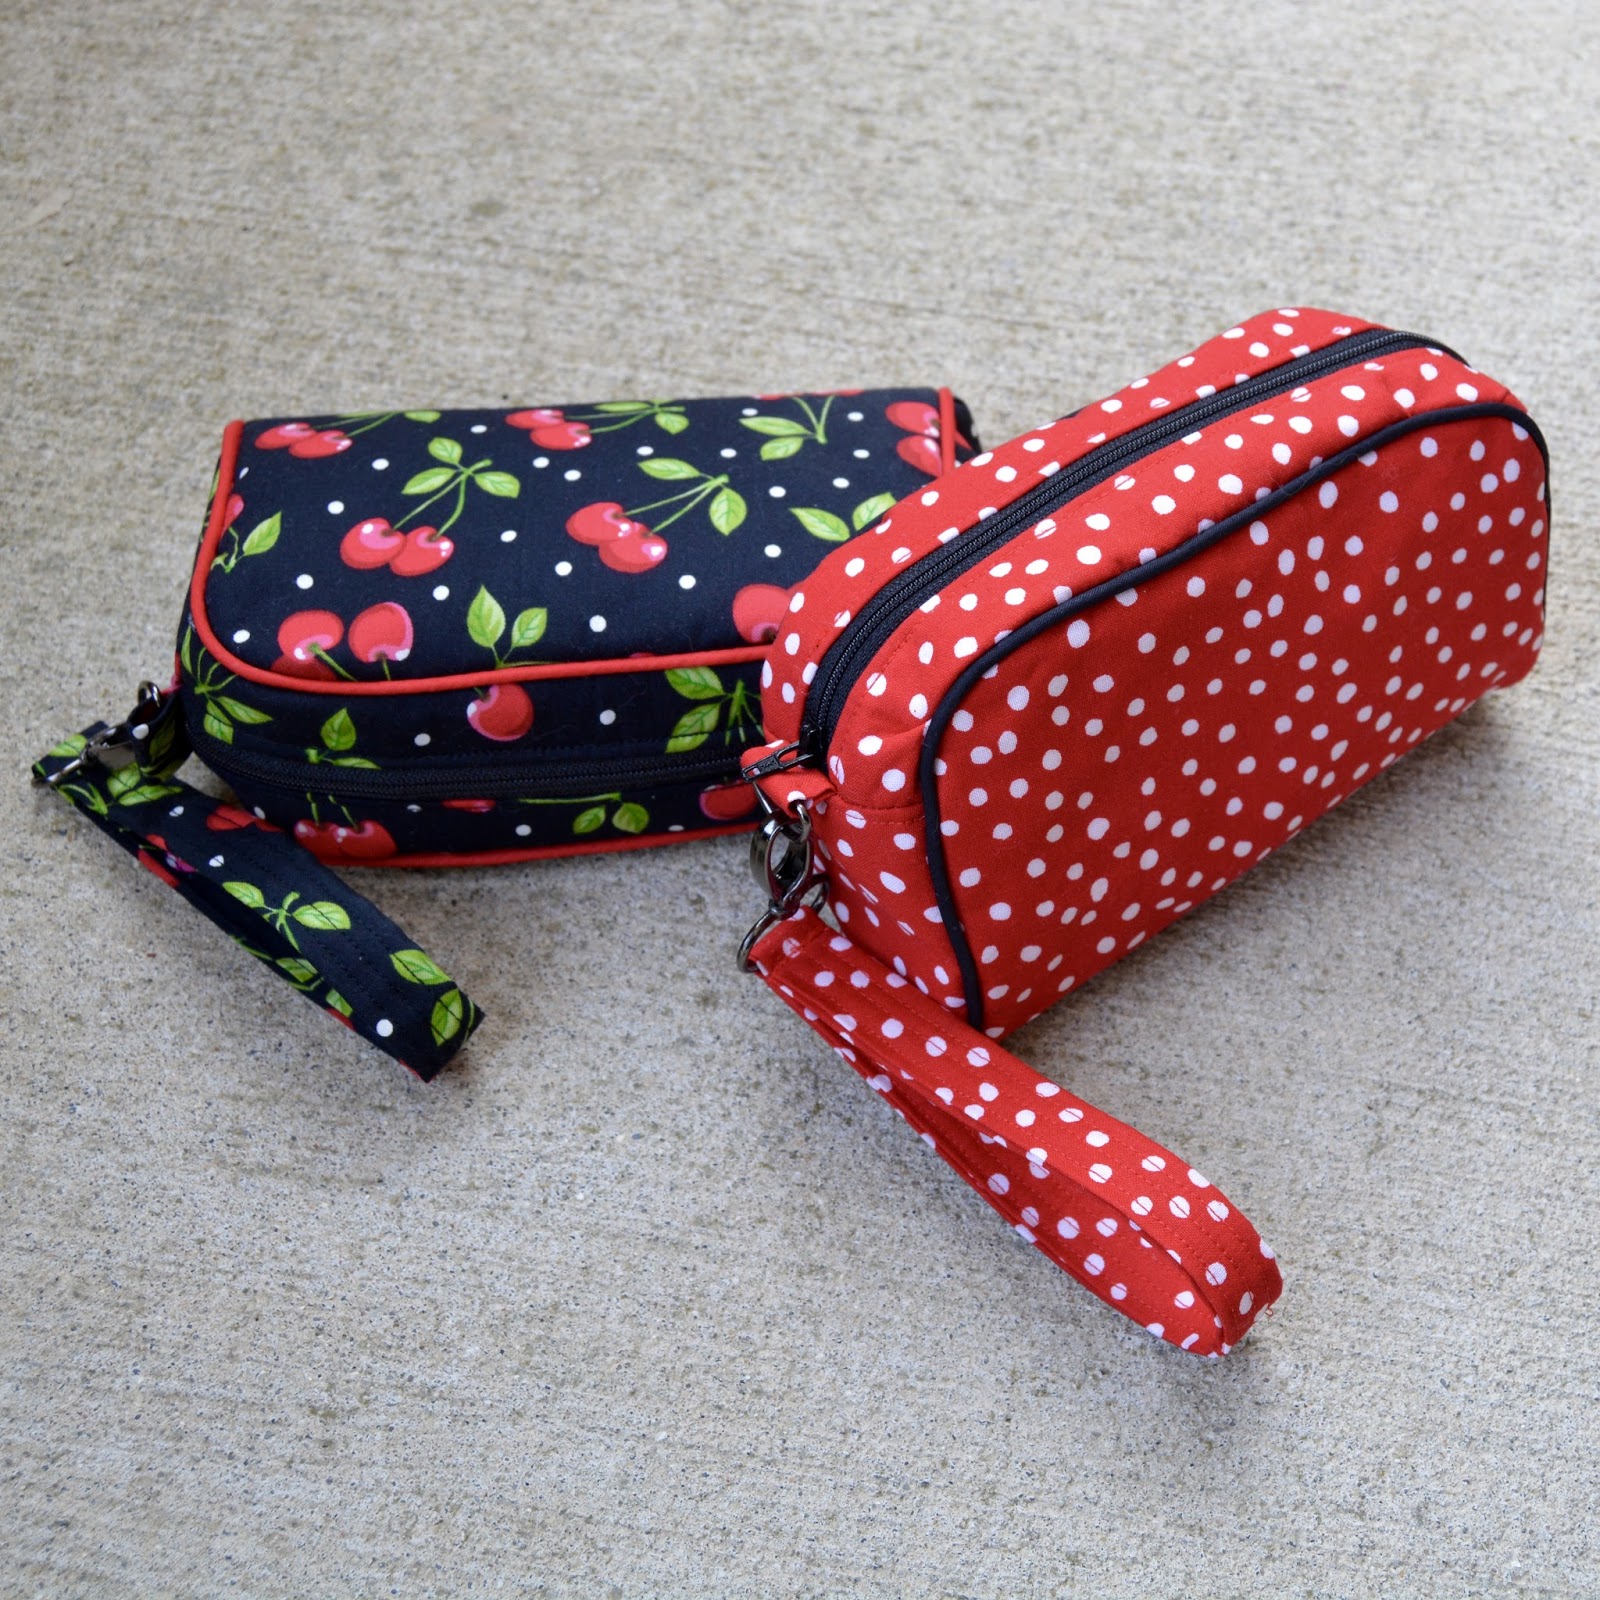 Roonie Ranching: Piped Zipper Pouch -- Sewing Tutorial